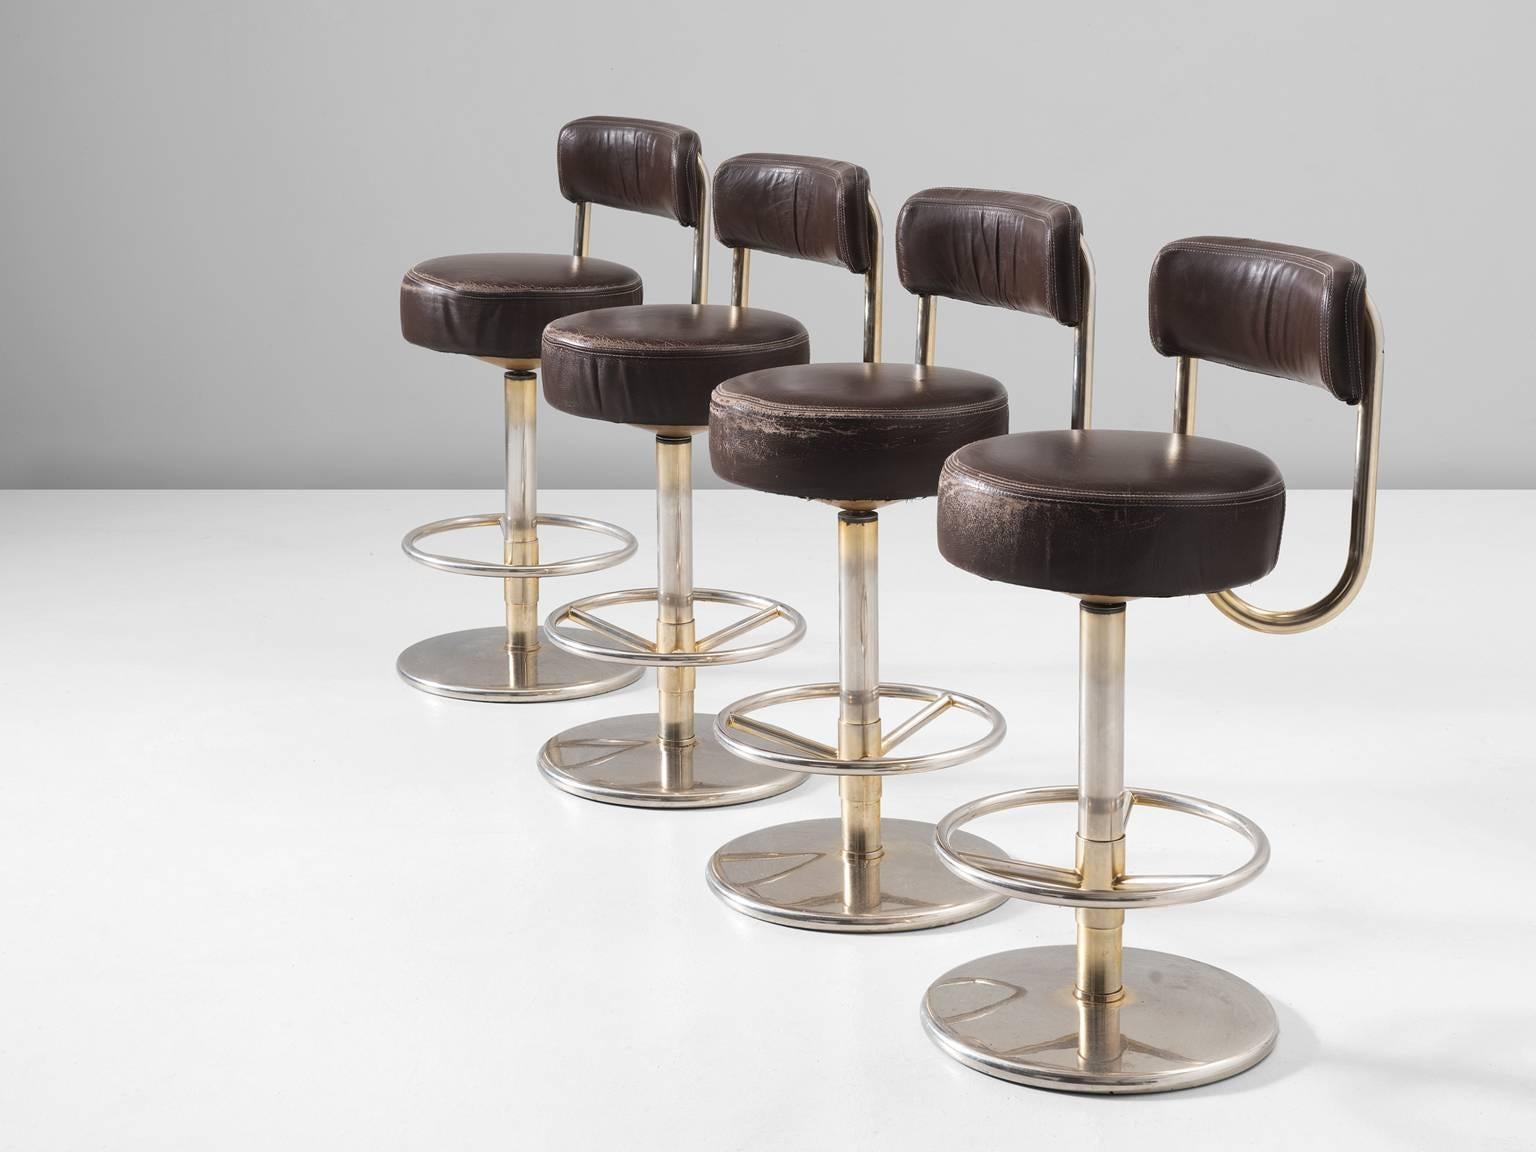 Set of four bar stools, in metal and leather, Scandinavia, 1970s. 

Set of four modern chrome swivel barstools in Hollywood regency style. These comfortable high barstools are in original brown leather upholstery. Due to the soft seat and back,